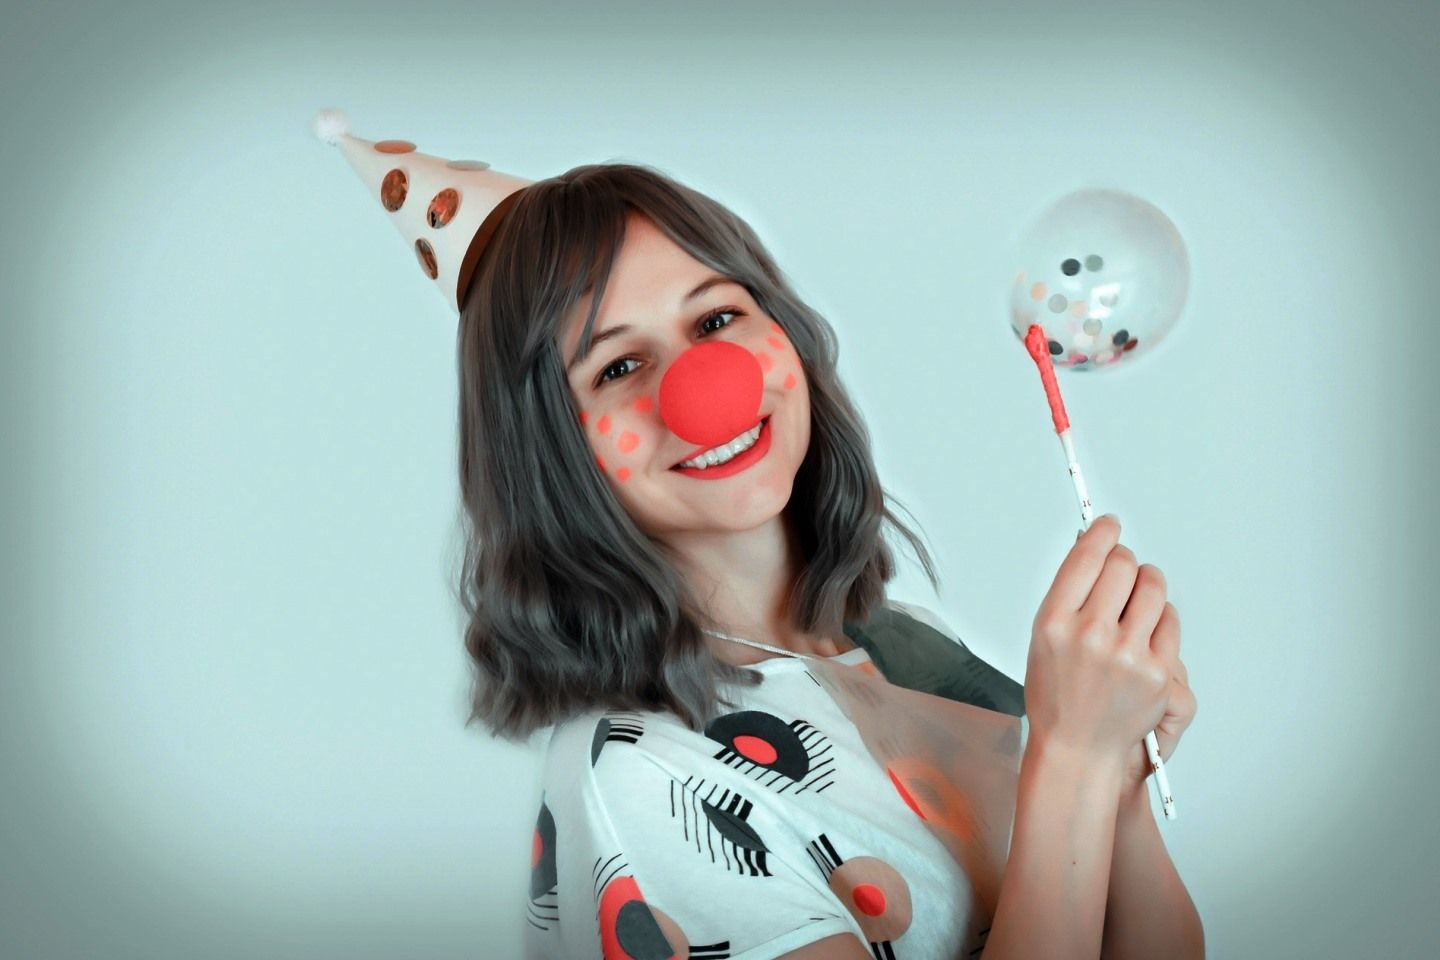 Clown Woman Red Nose downloaded from pixabay.com